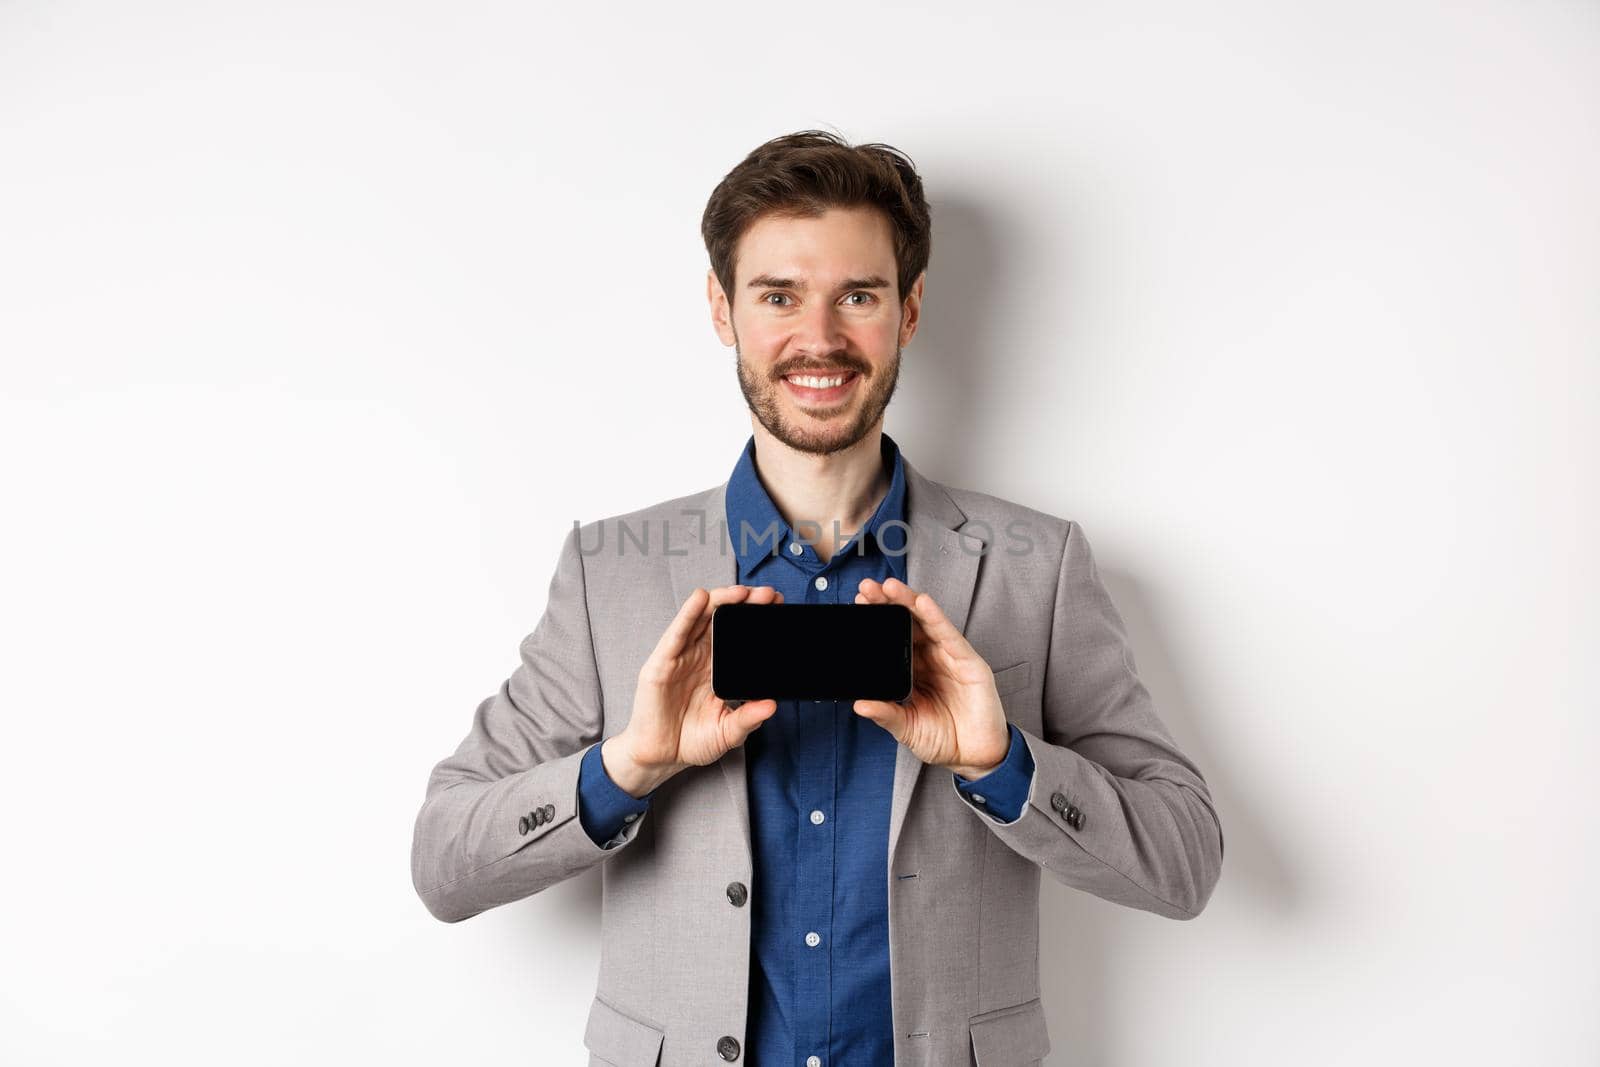 E-commerce and online shopping concept. Happy guy in business suit showing empty smartphone screen horizontally, smiling pleased at camera, white background.